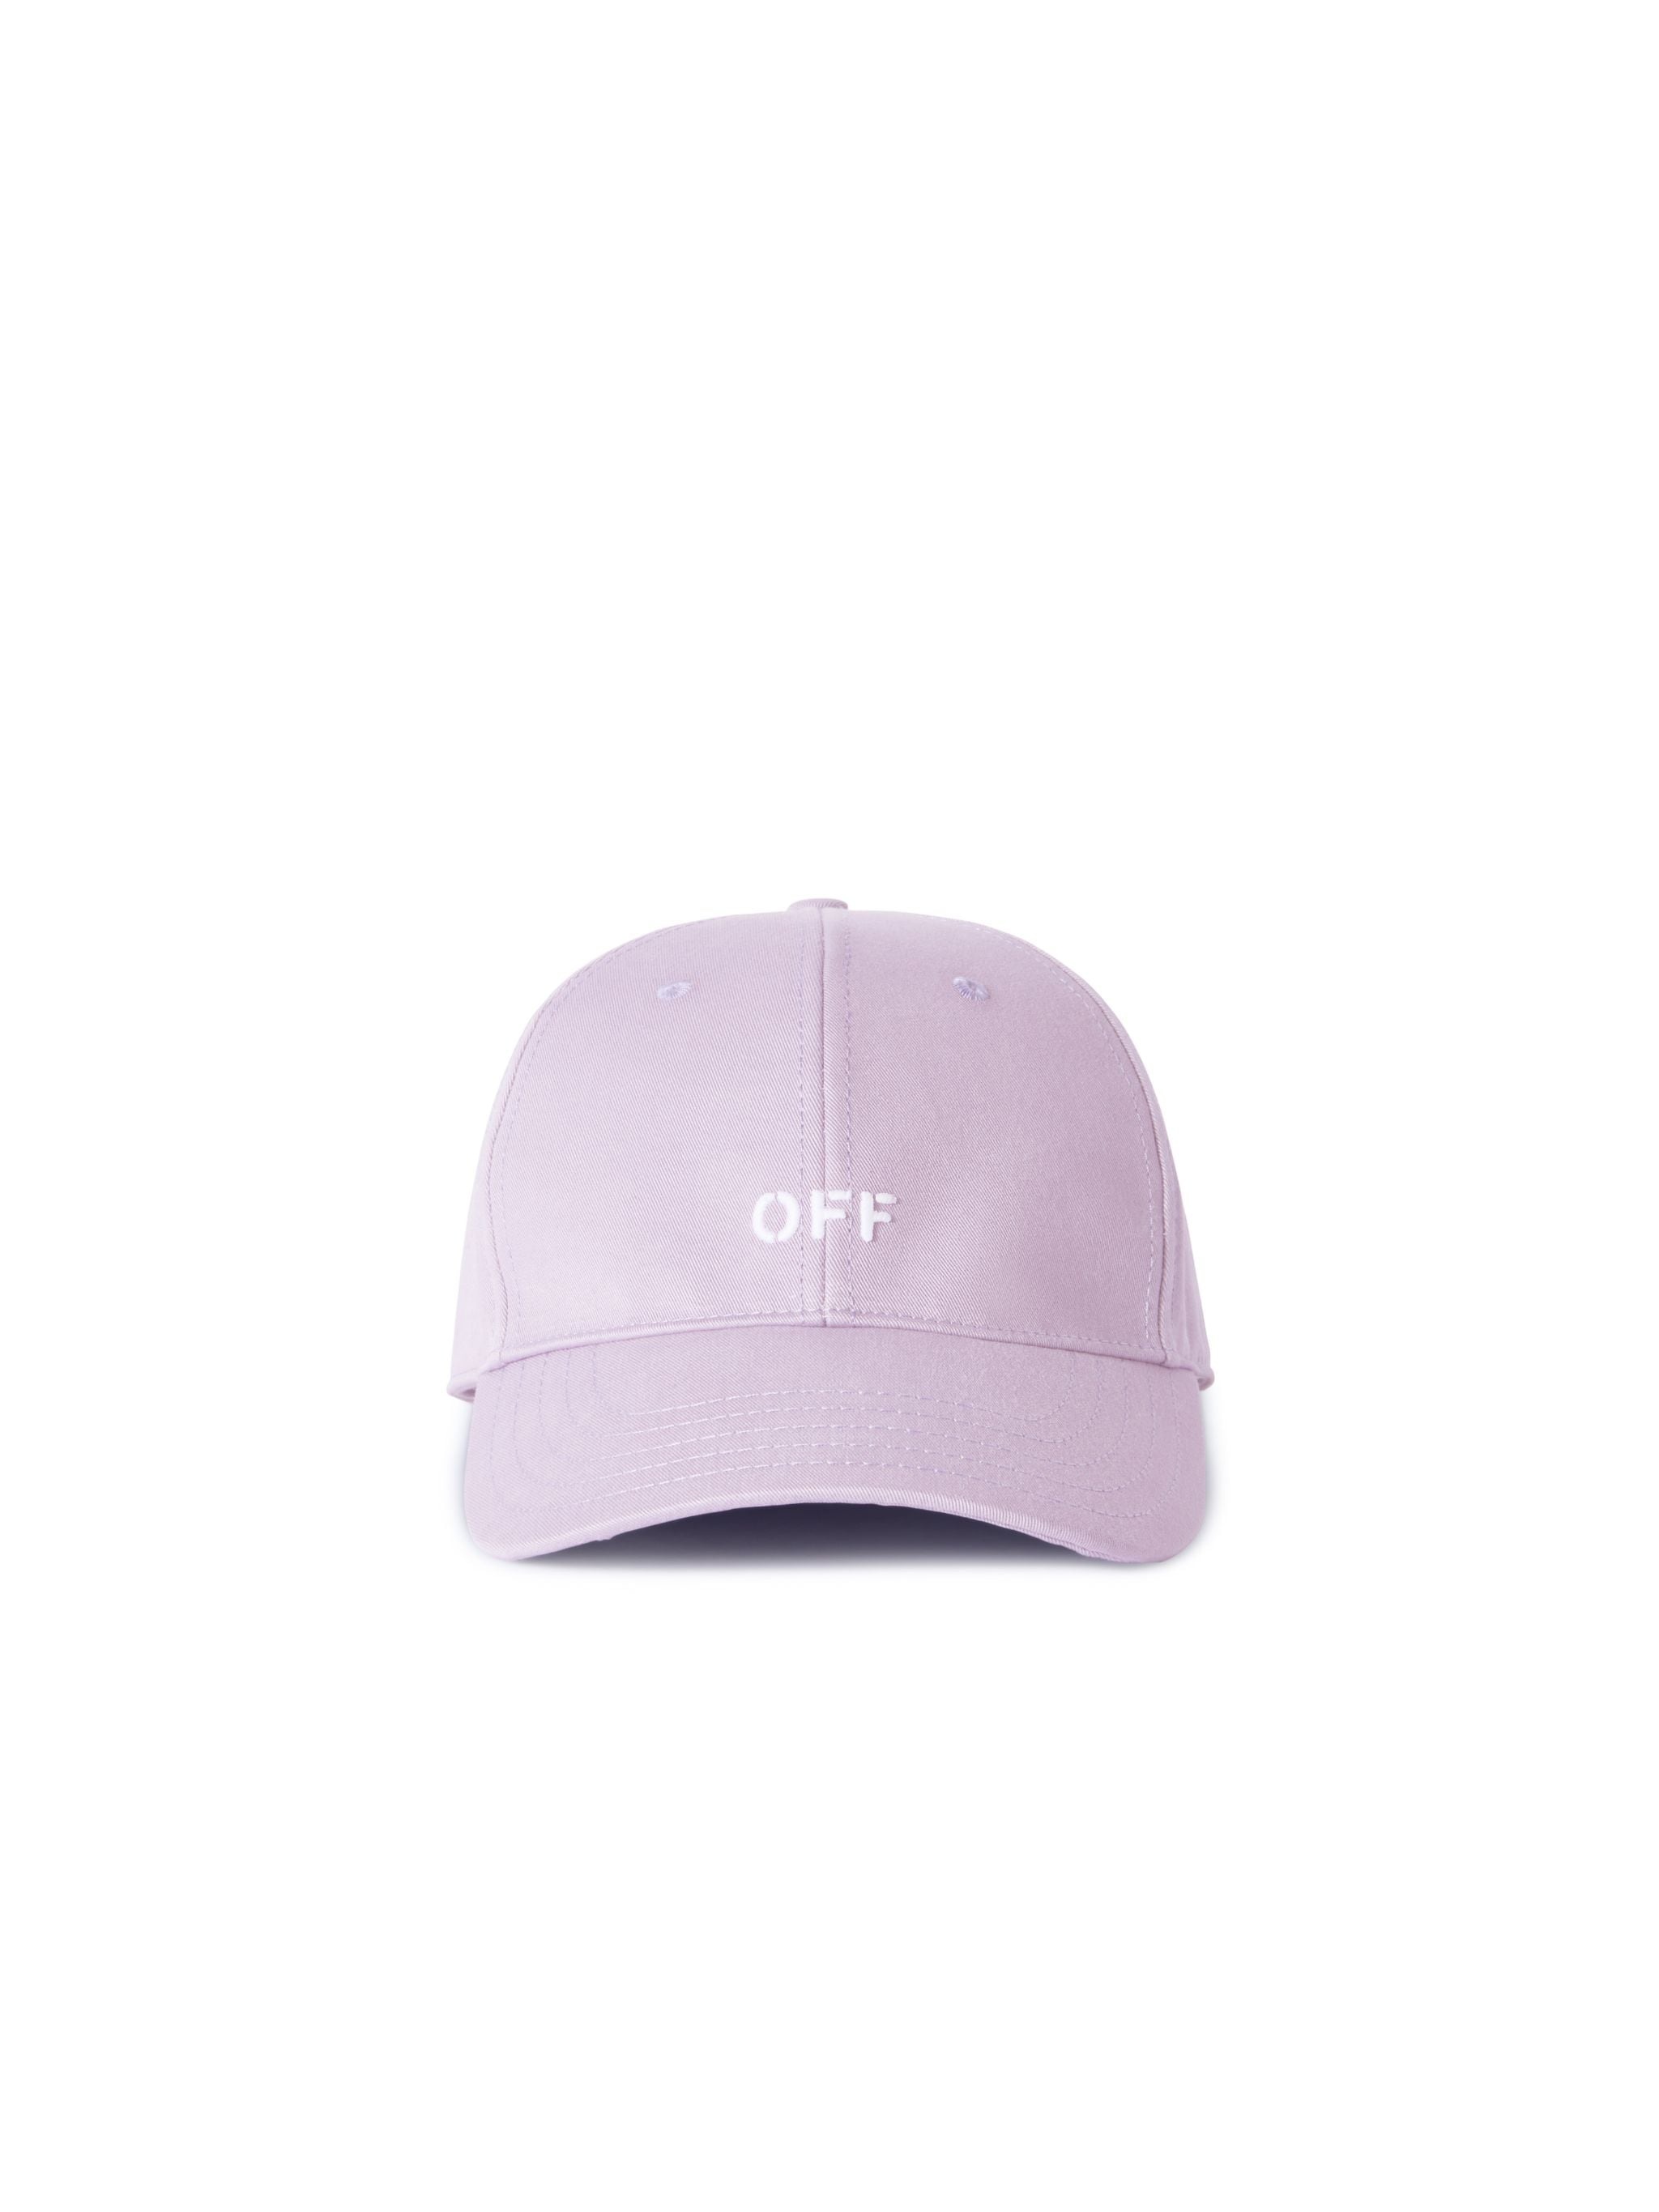 Drill Off Stamp Baseball Cap Lilac Whit - 1